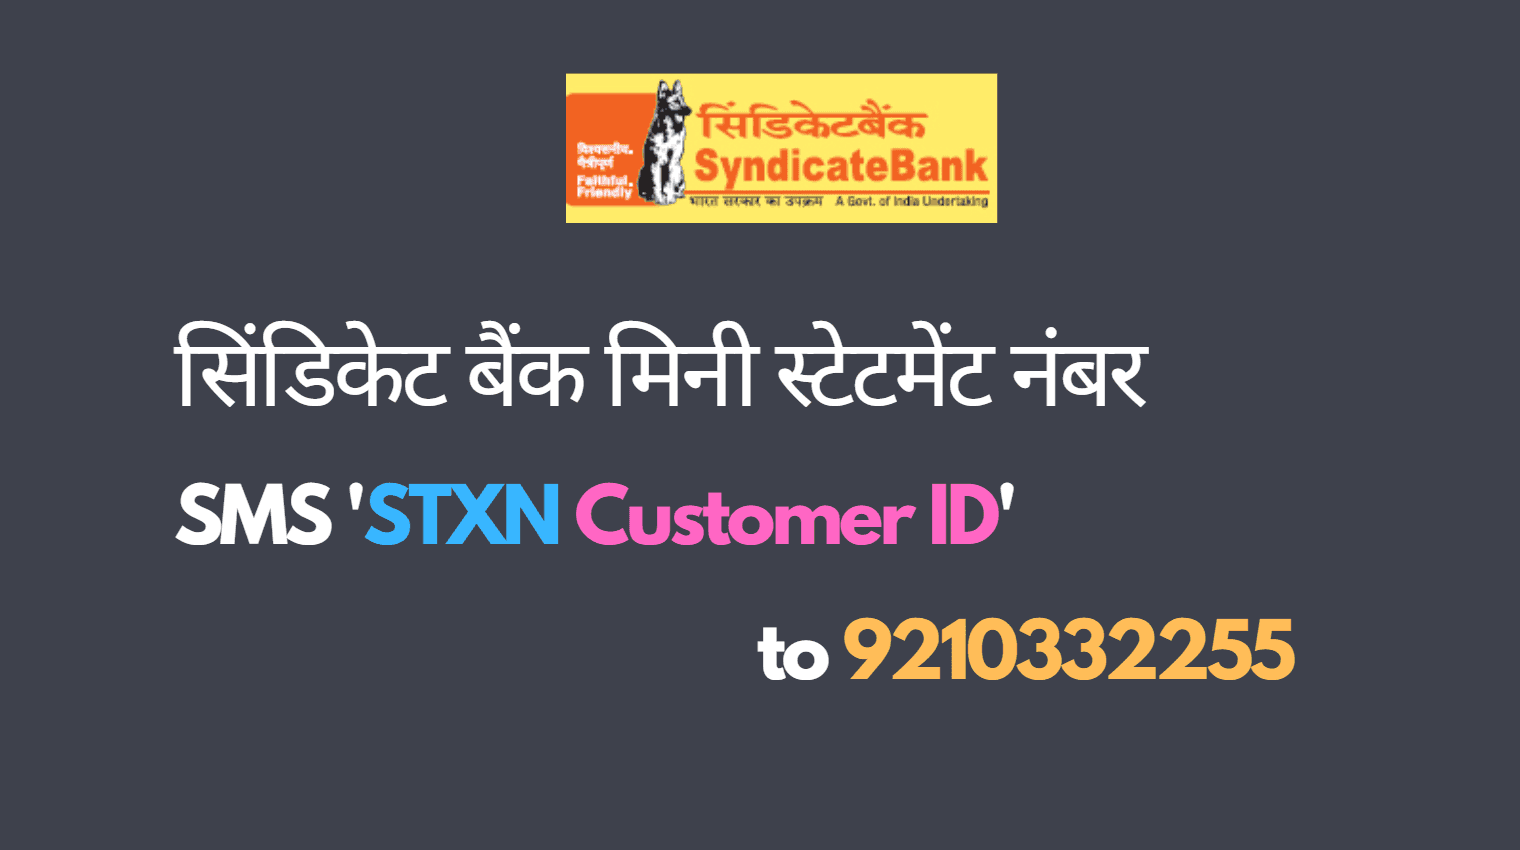 syndicate bank mini statement sms number